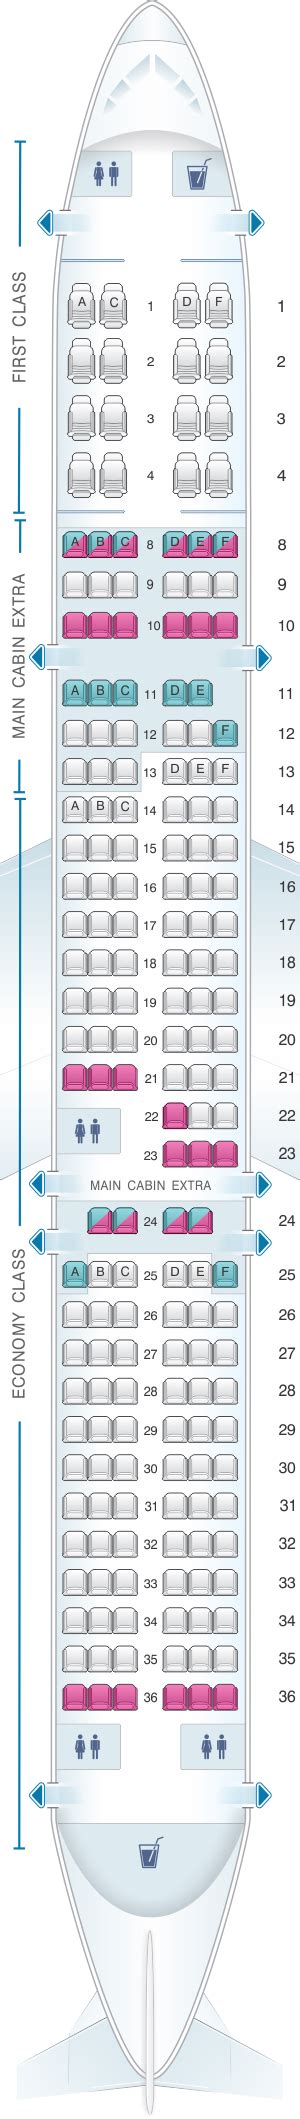 American Airlines Airbus A Seat Map Two Birds Home